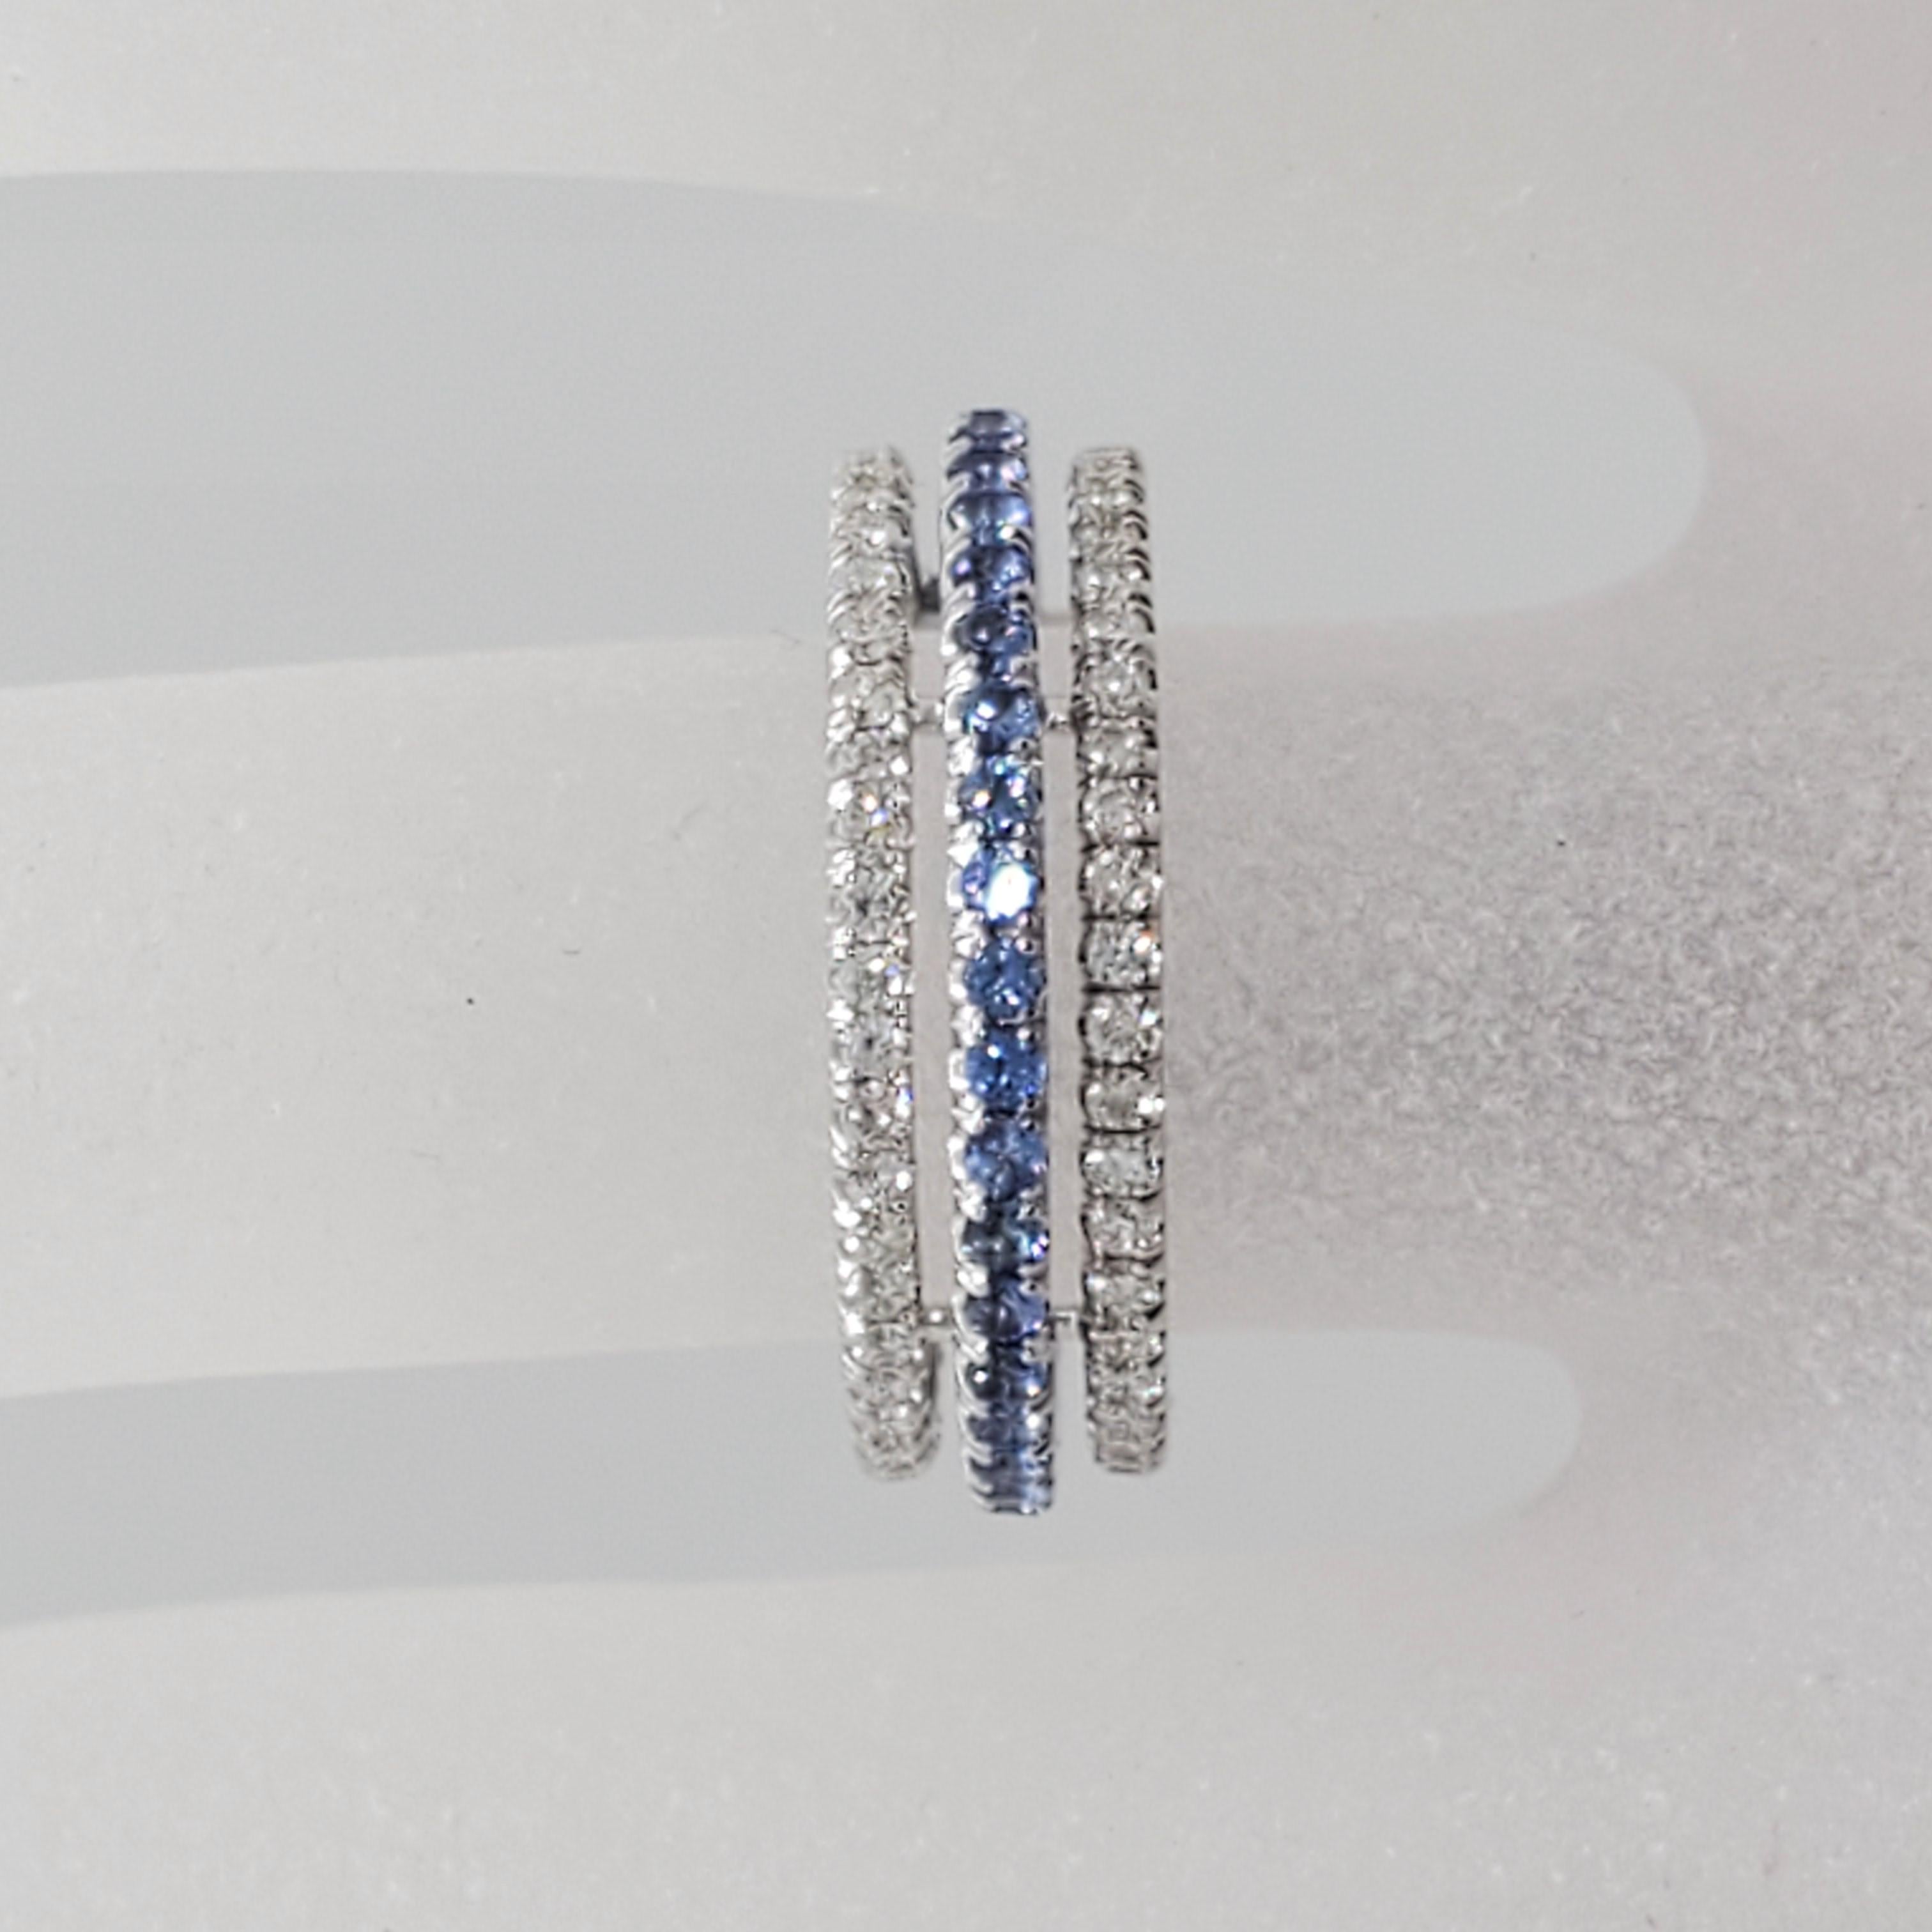 Beautiful blue sapphire and white diamond band featuring 0.69 cts of blue sapphire rounds and 0.71 cts of white diamond rounds.  Handmade in 14k white gold in a size 6.  Great for stacking!  Matching pink sapphire and diamond band on another listing.